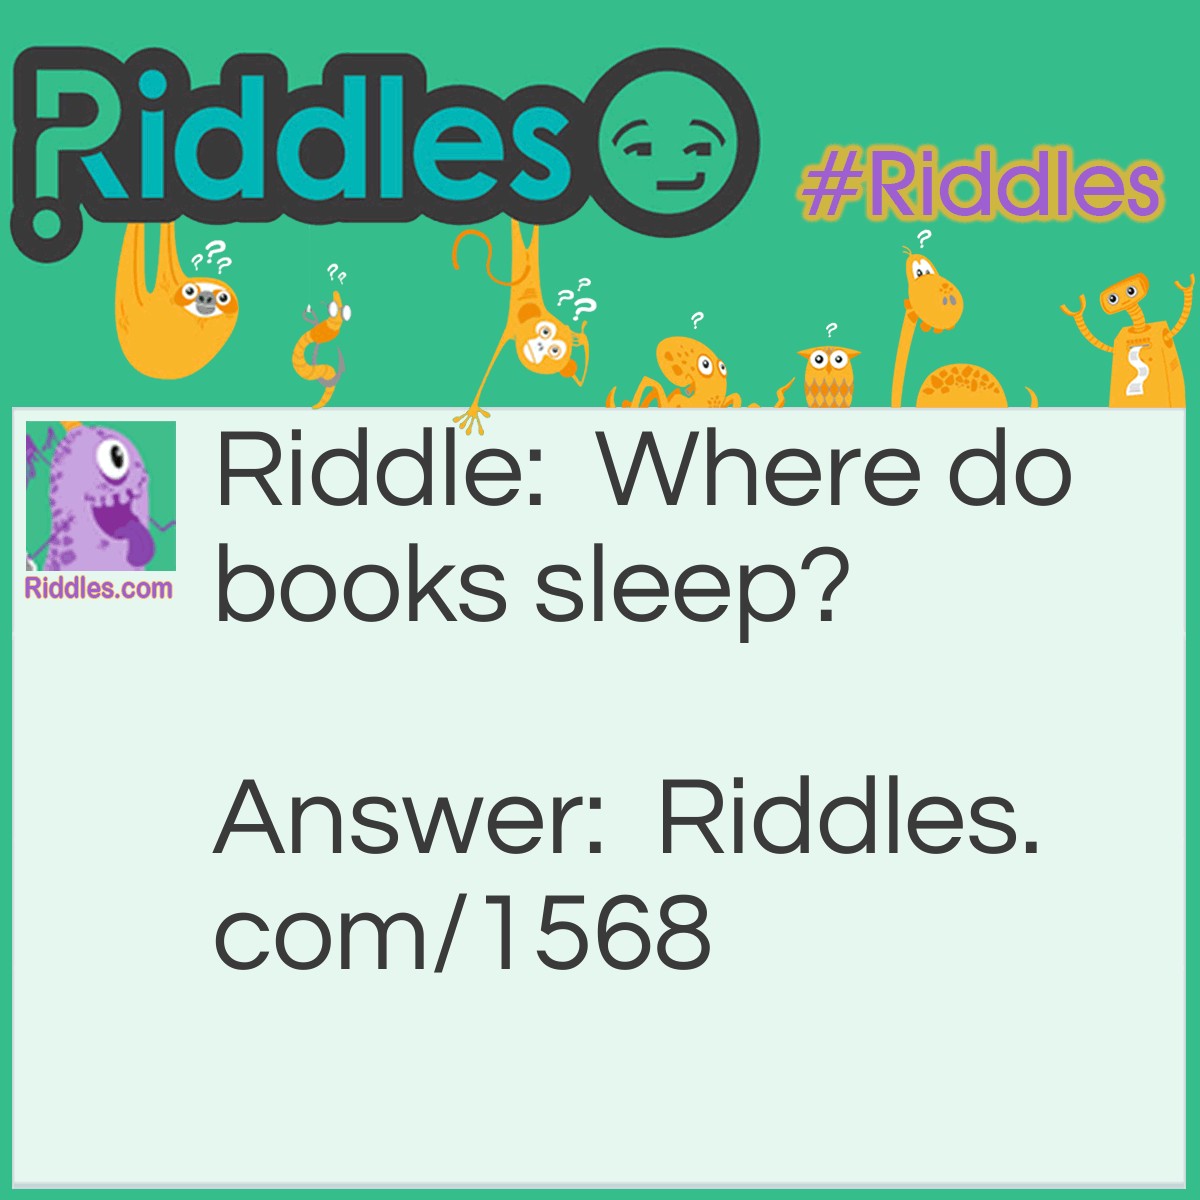 Riddle: Where do books sleep? Answer: Between their covers.